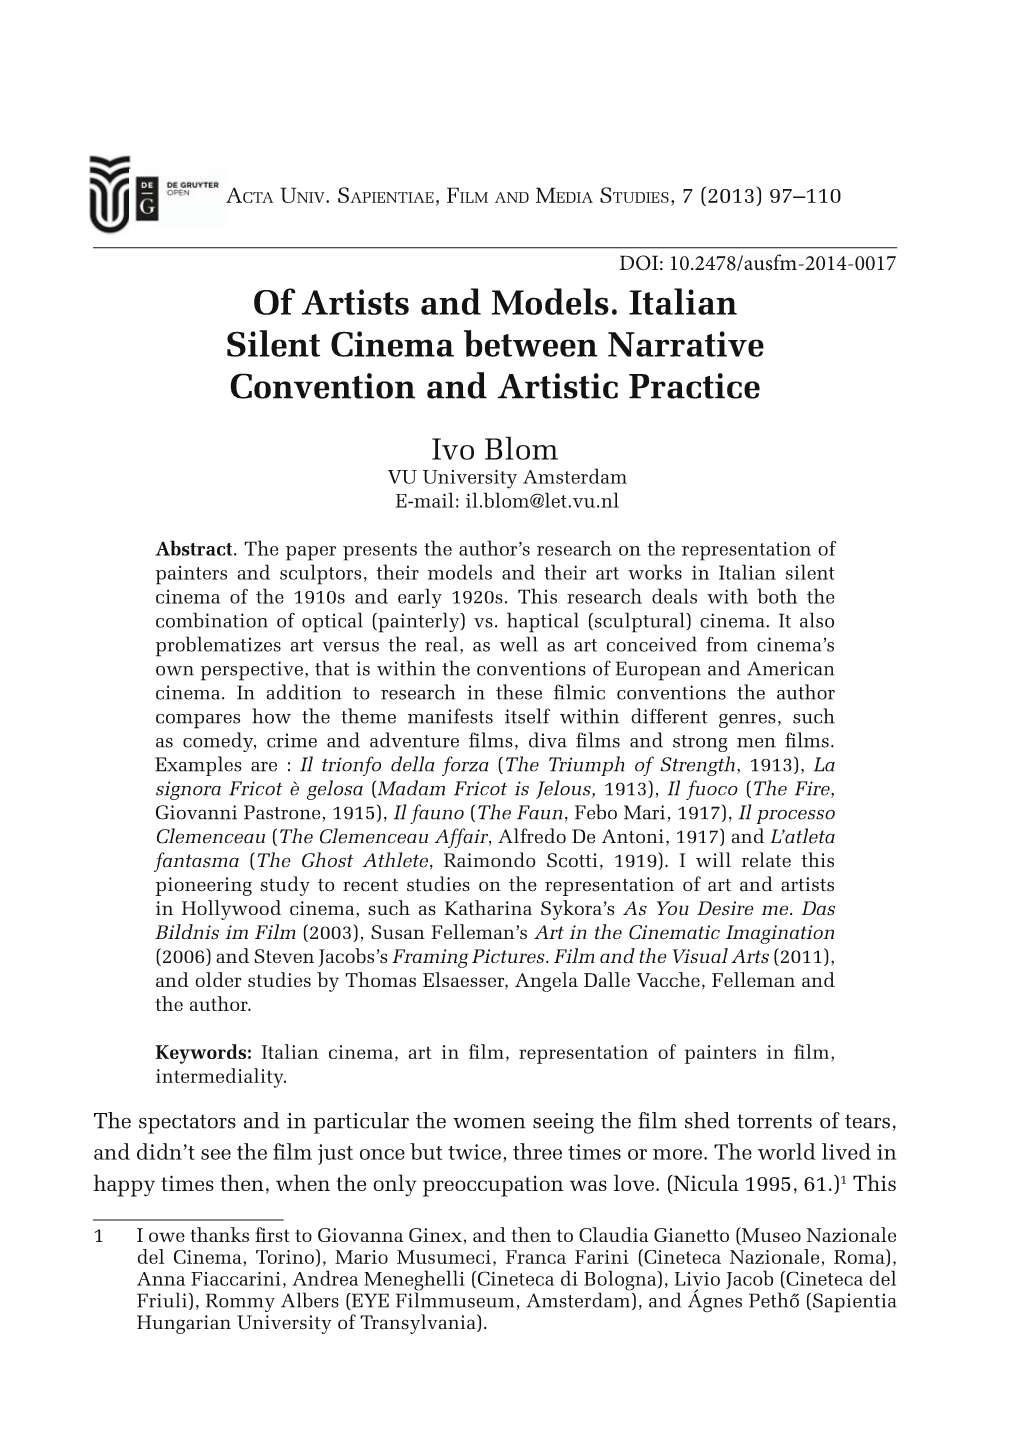 Of Artists and Models. Italian Silent Cinema Between Narrative Convention and Artistic Practice Ivo Blom VU University Amsterdam E-Mail: Il.Blom@Let.Vu.Nl